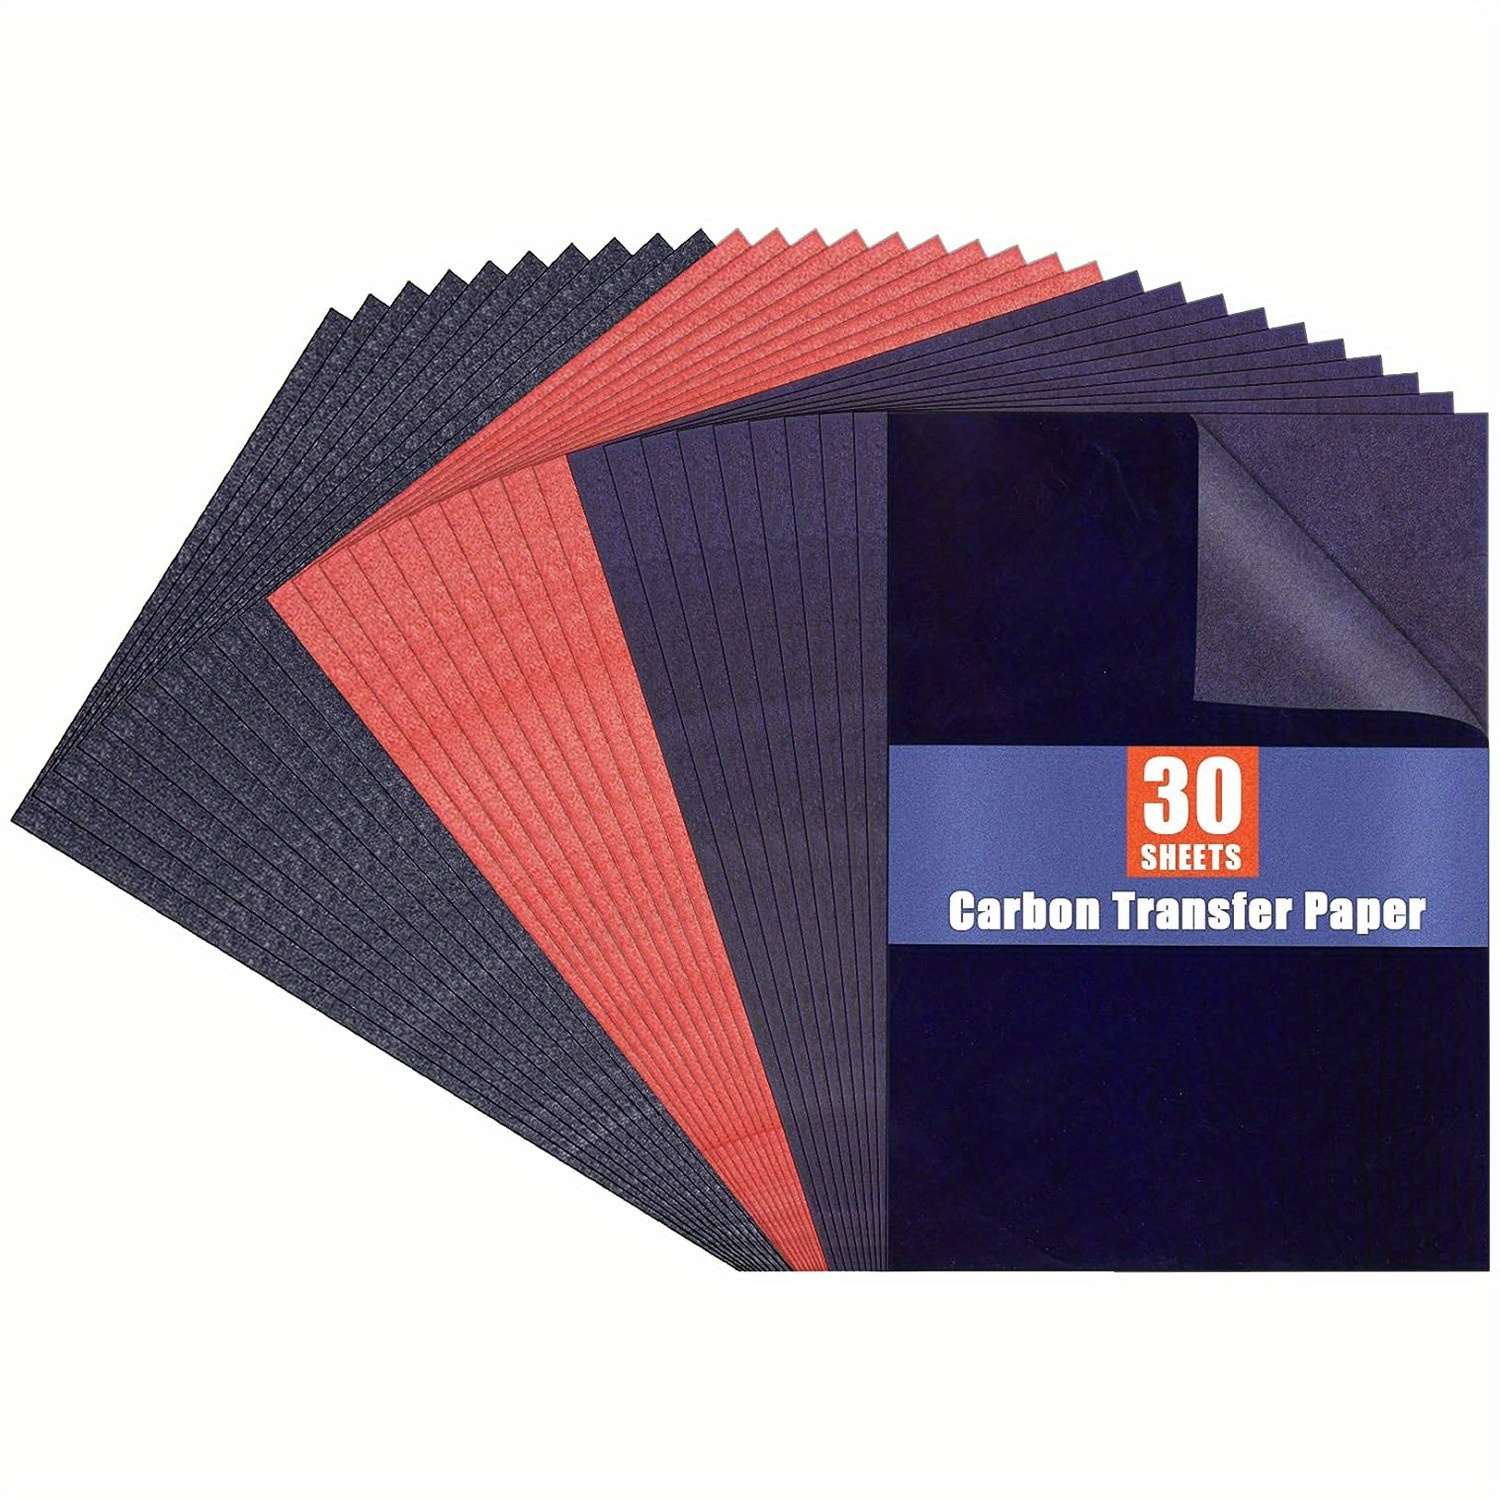 Tracing Paper for drawing. A4 size tracing paper sheets for art projects